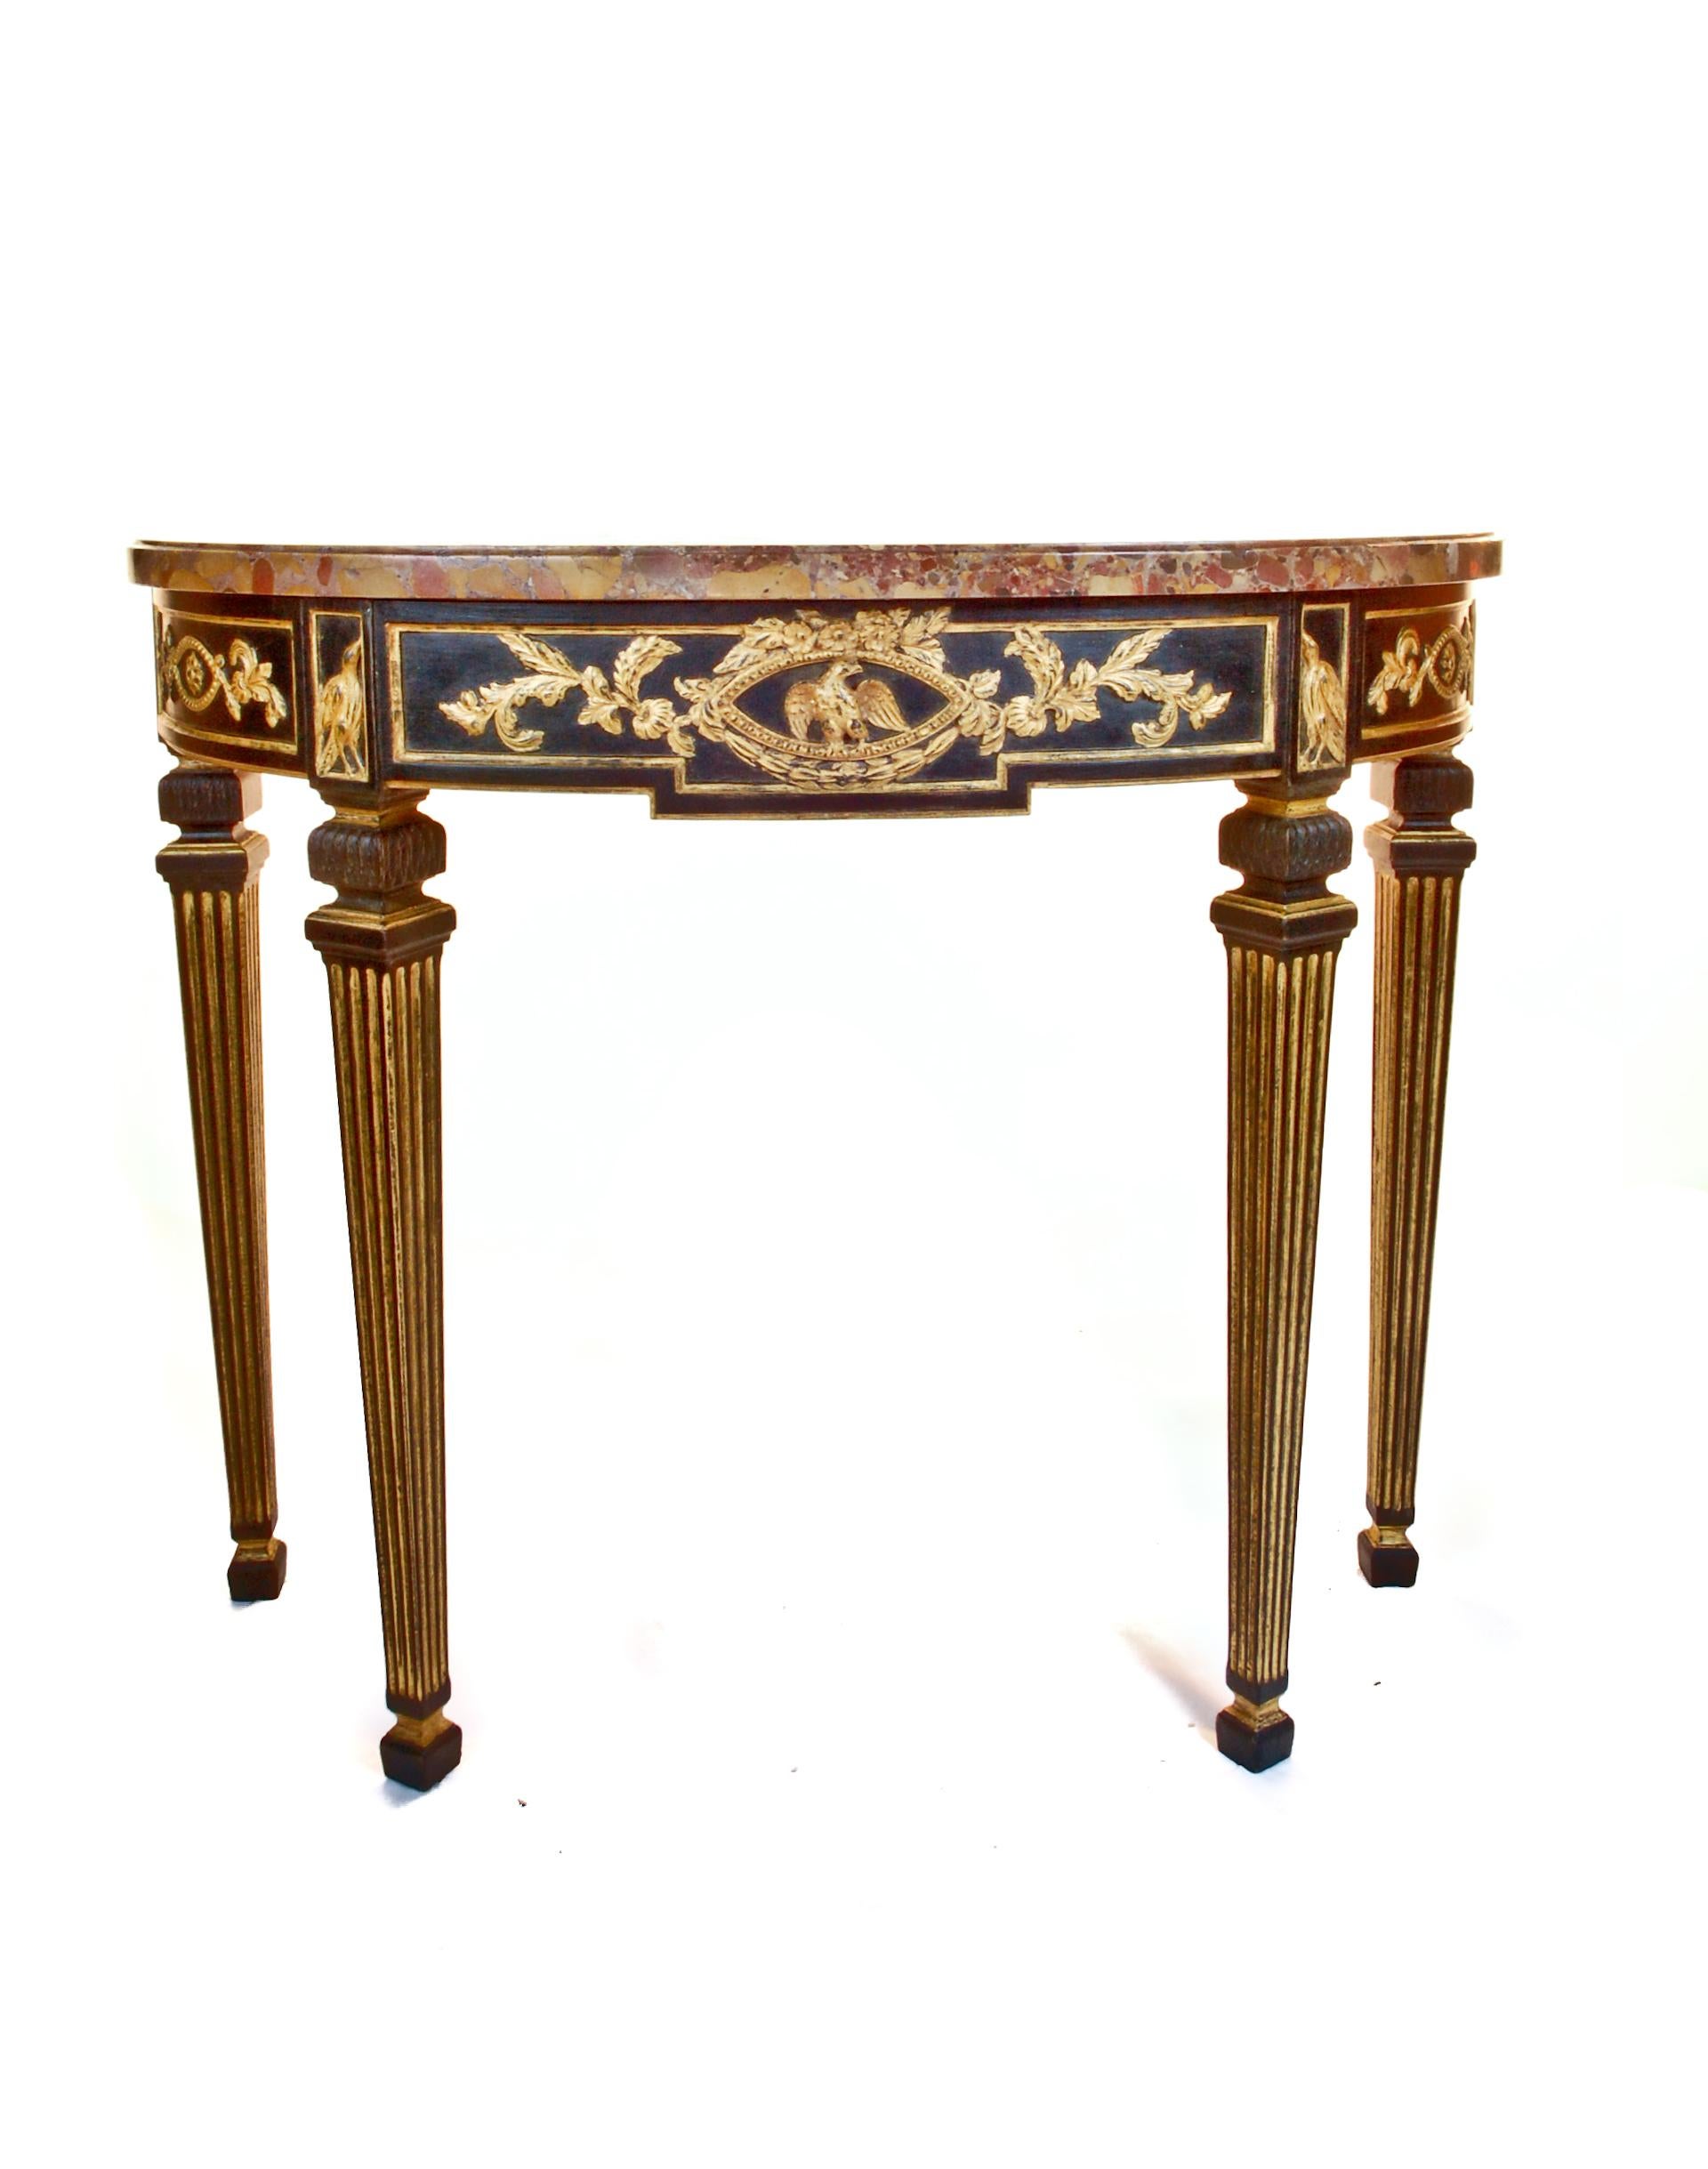 A pair of fine antique French Louis XVI style ebony and gilt decorated hand-carved wood marble top demilune shaped console tables embellished with eagles in the centre.